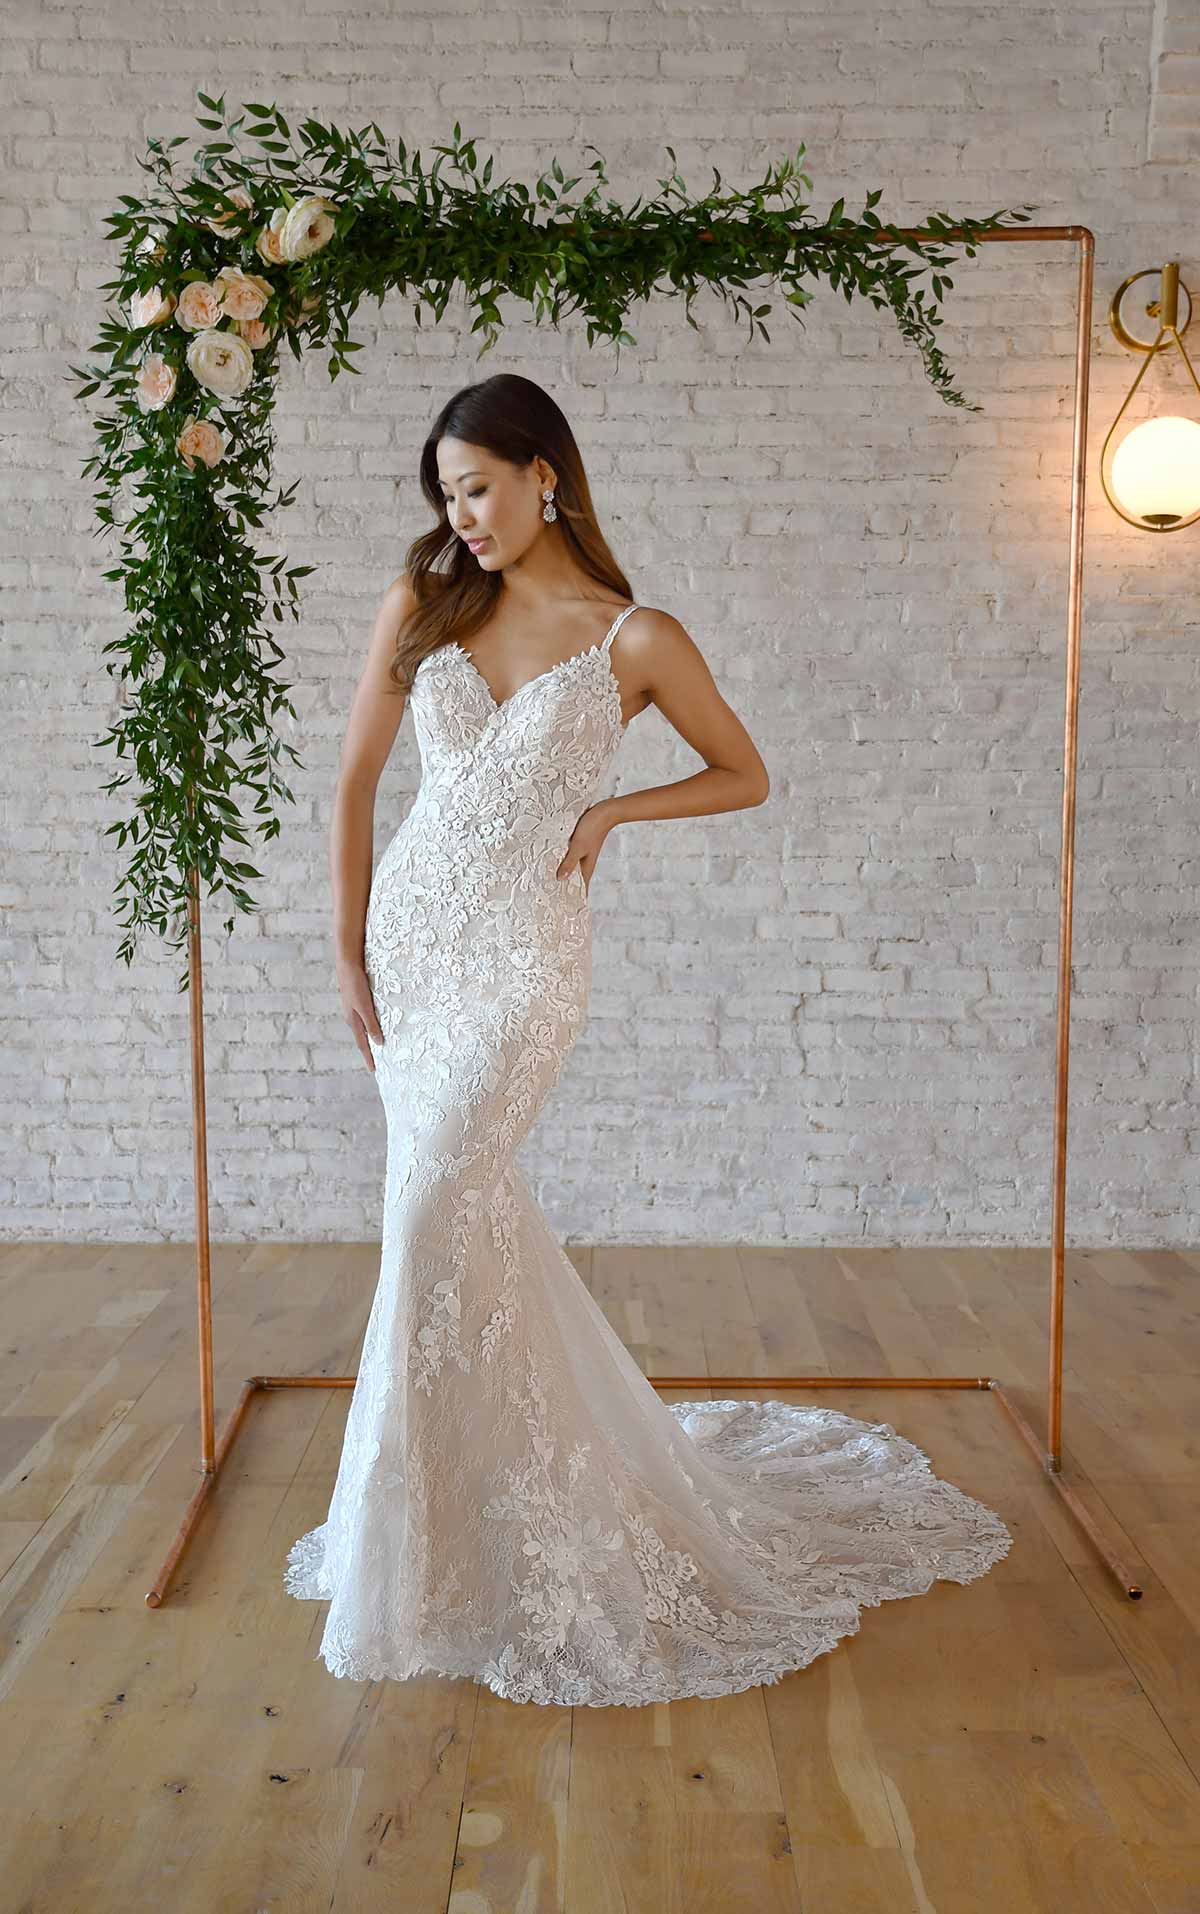 Sexy Fit And Flare Wedding Dress With Sparkling Floral Lace And